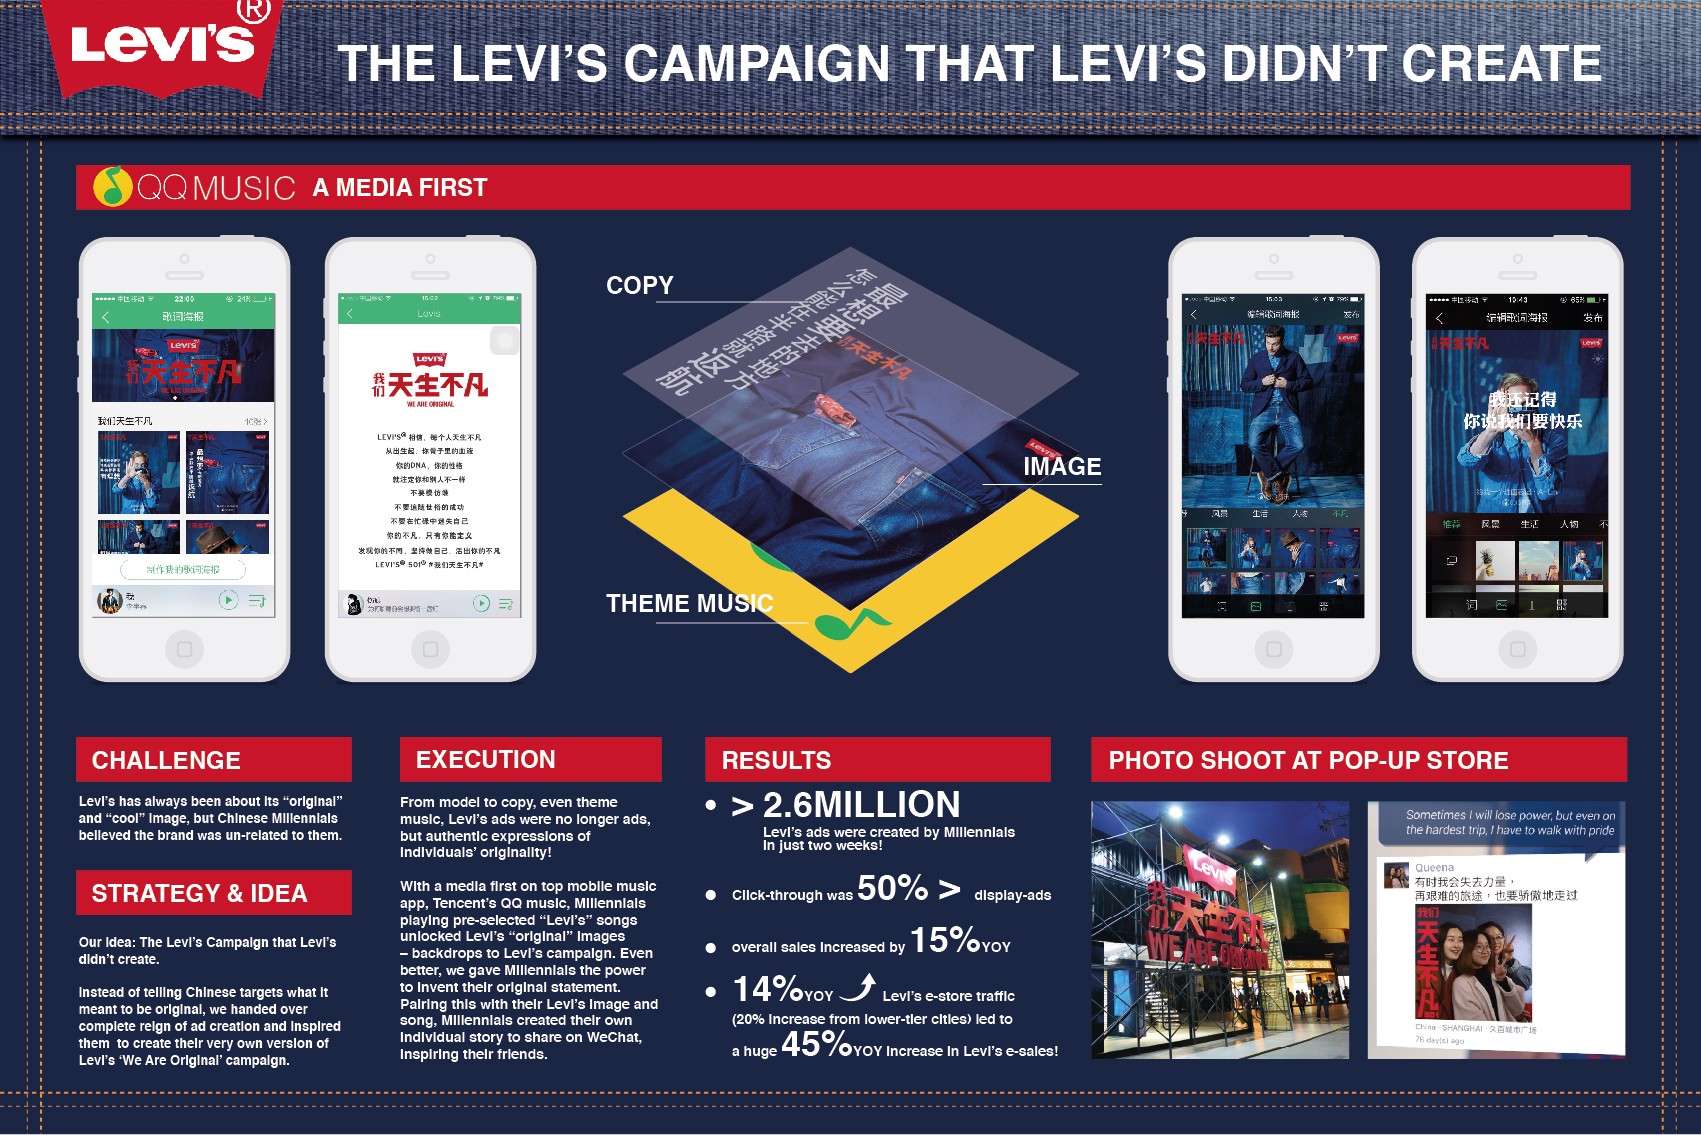 The Levi’s Campaign That Levi’s Didn’t Create